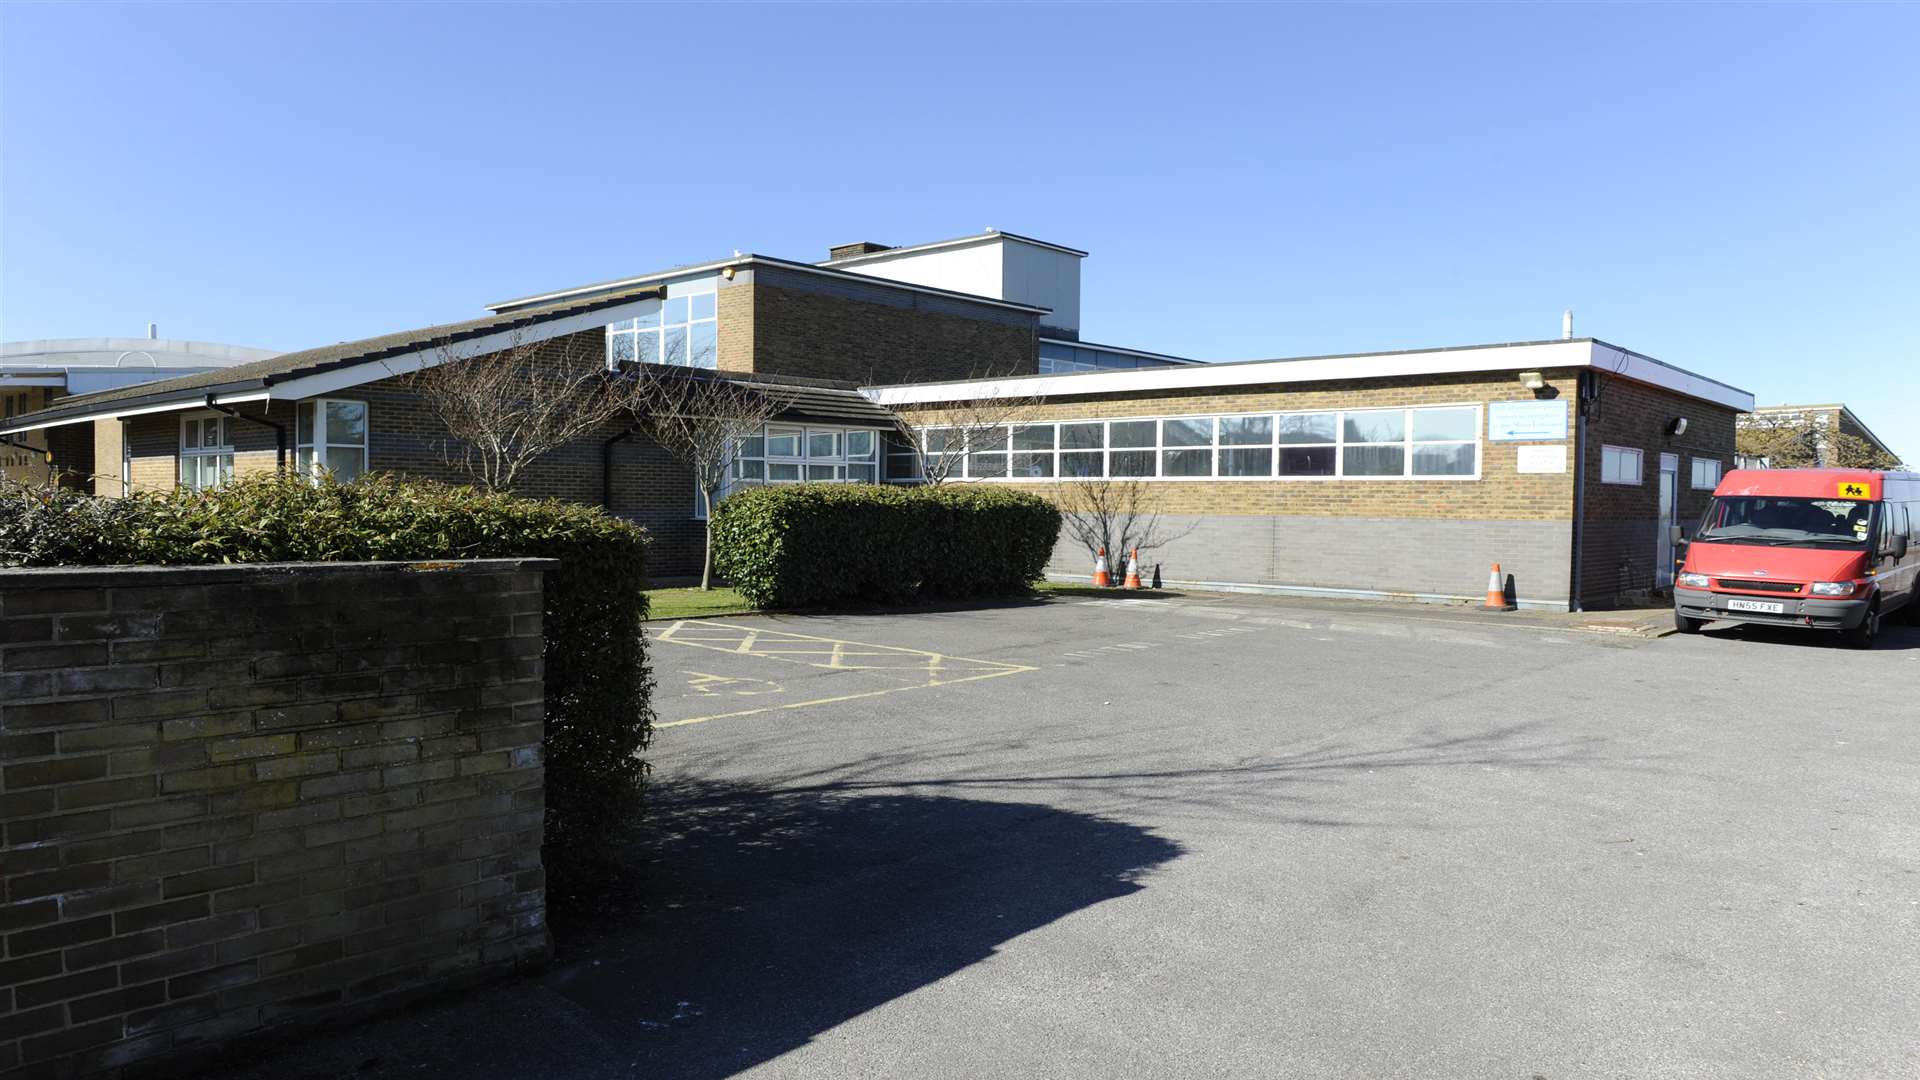 The Walmer site could become home to up to 120 Year 7 pupils from September 2019 to September 2020